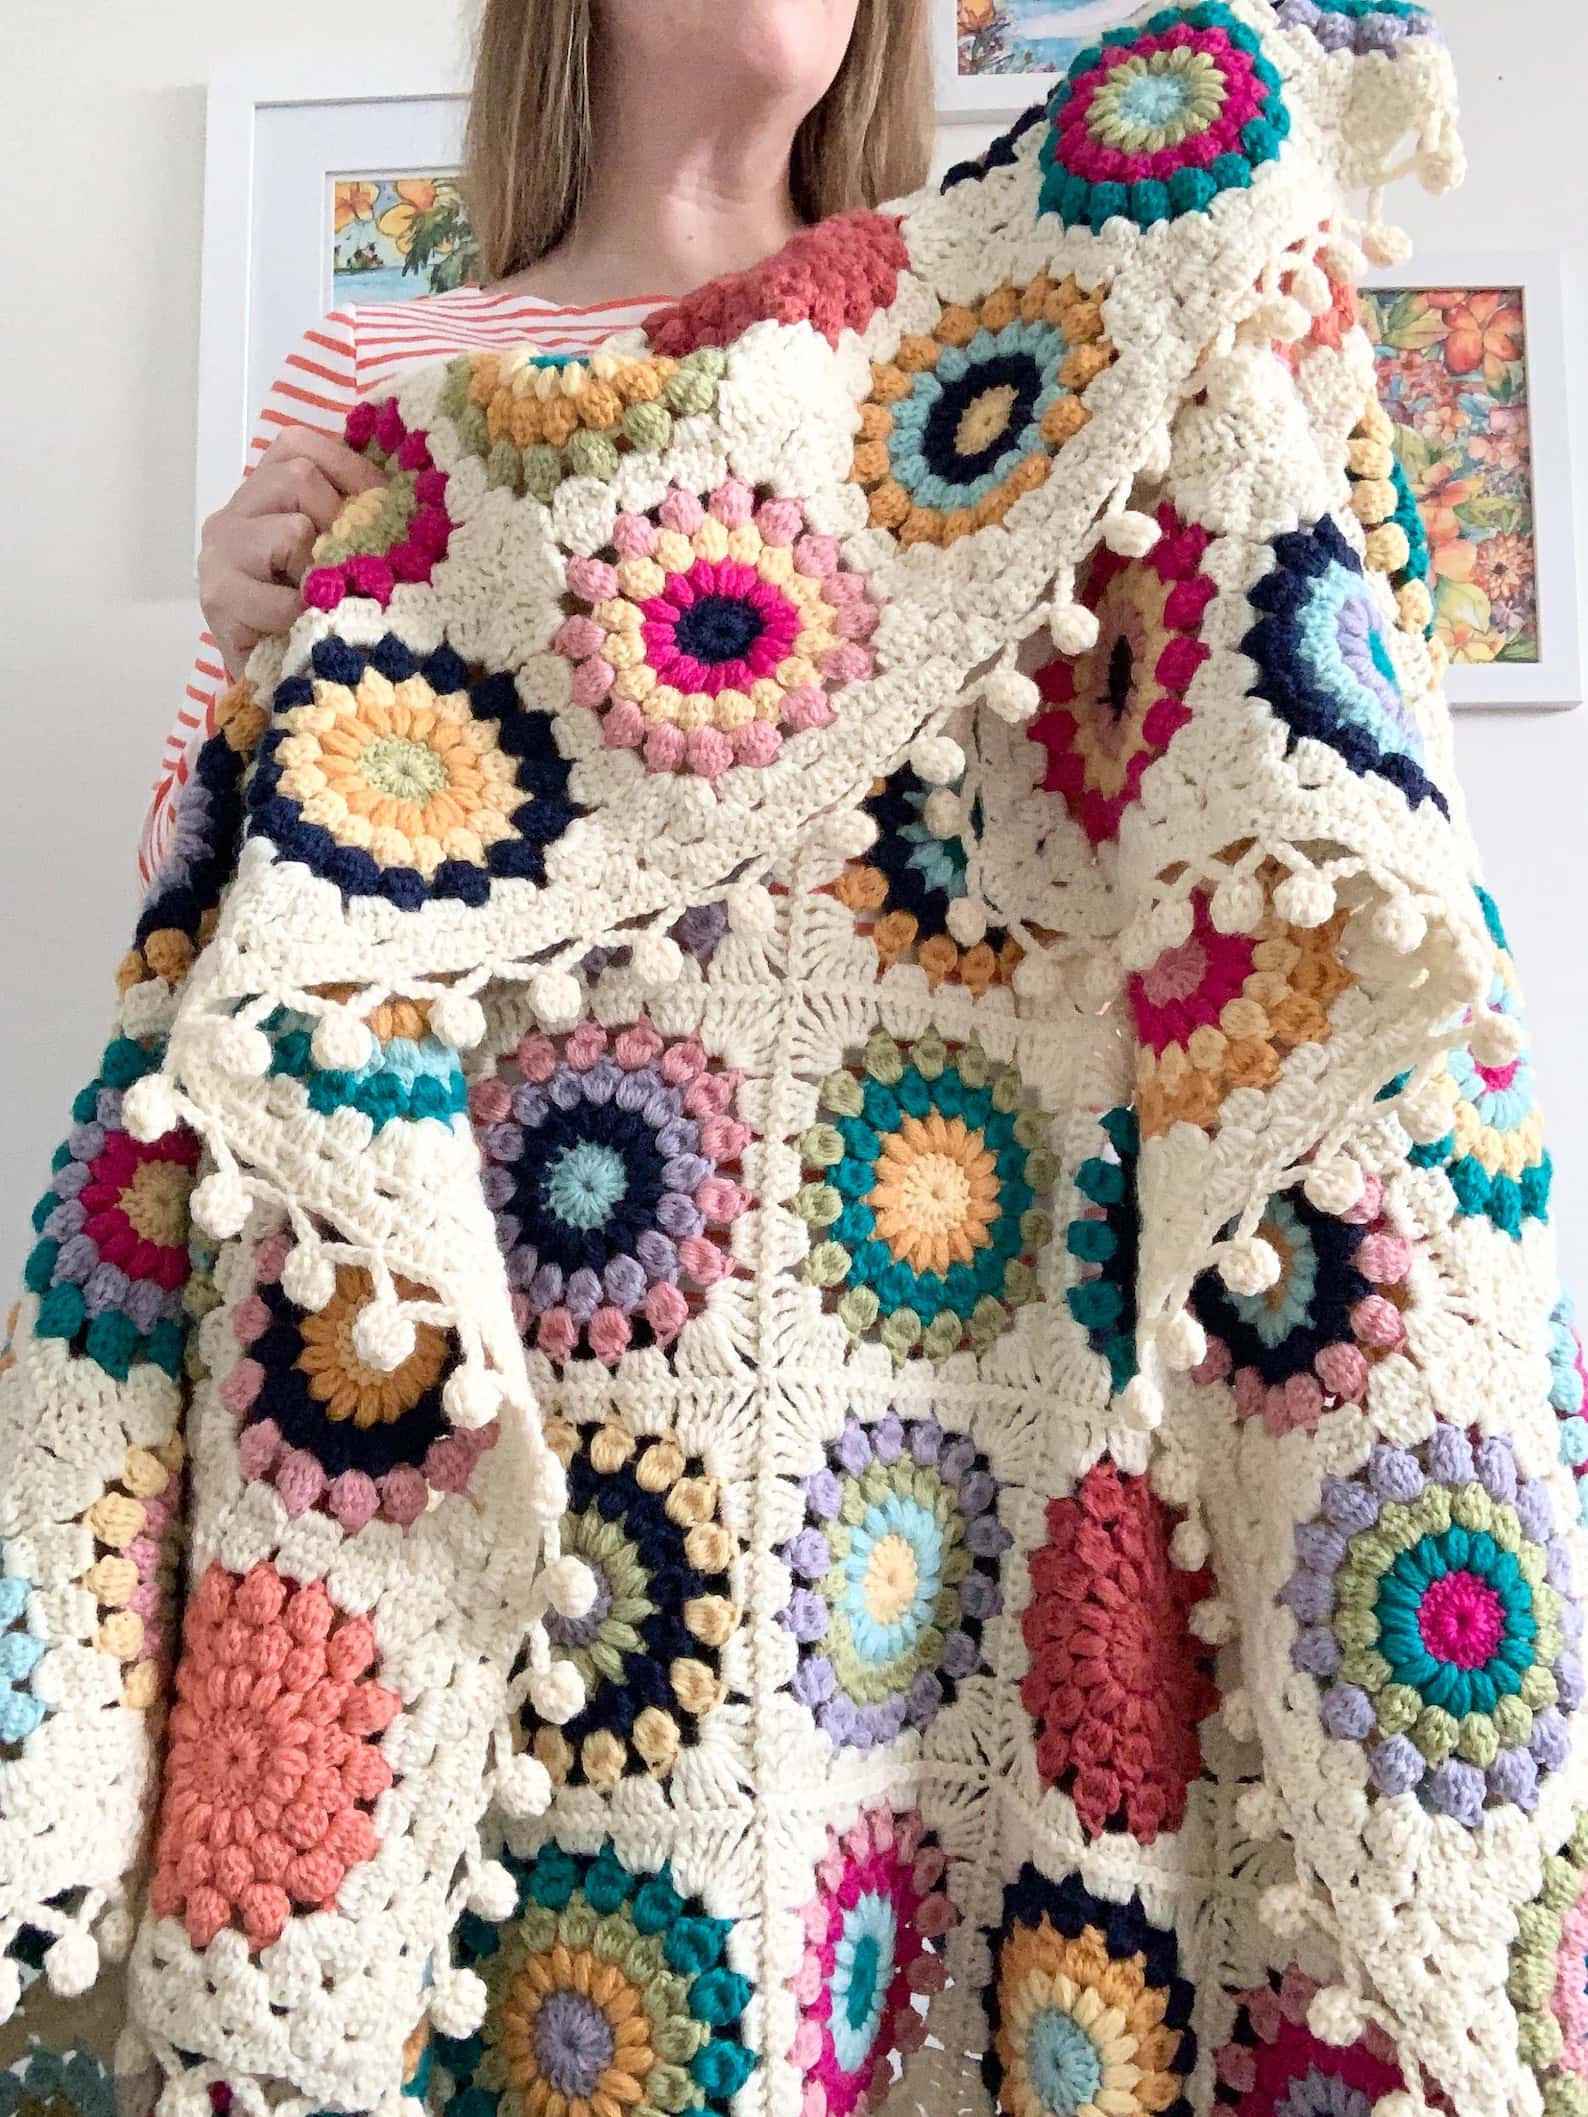 island time sunburst granny square crochet blanket pattern by Mallory Krall, available for free online or to buy as a printable PDF on Etsy. Click through to get your pattern now